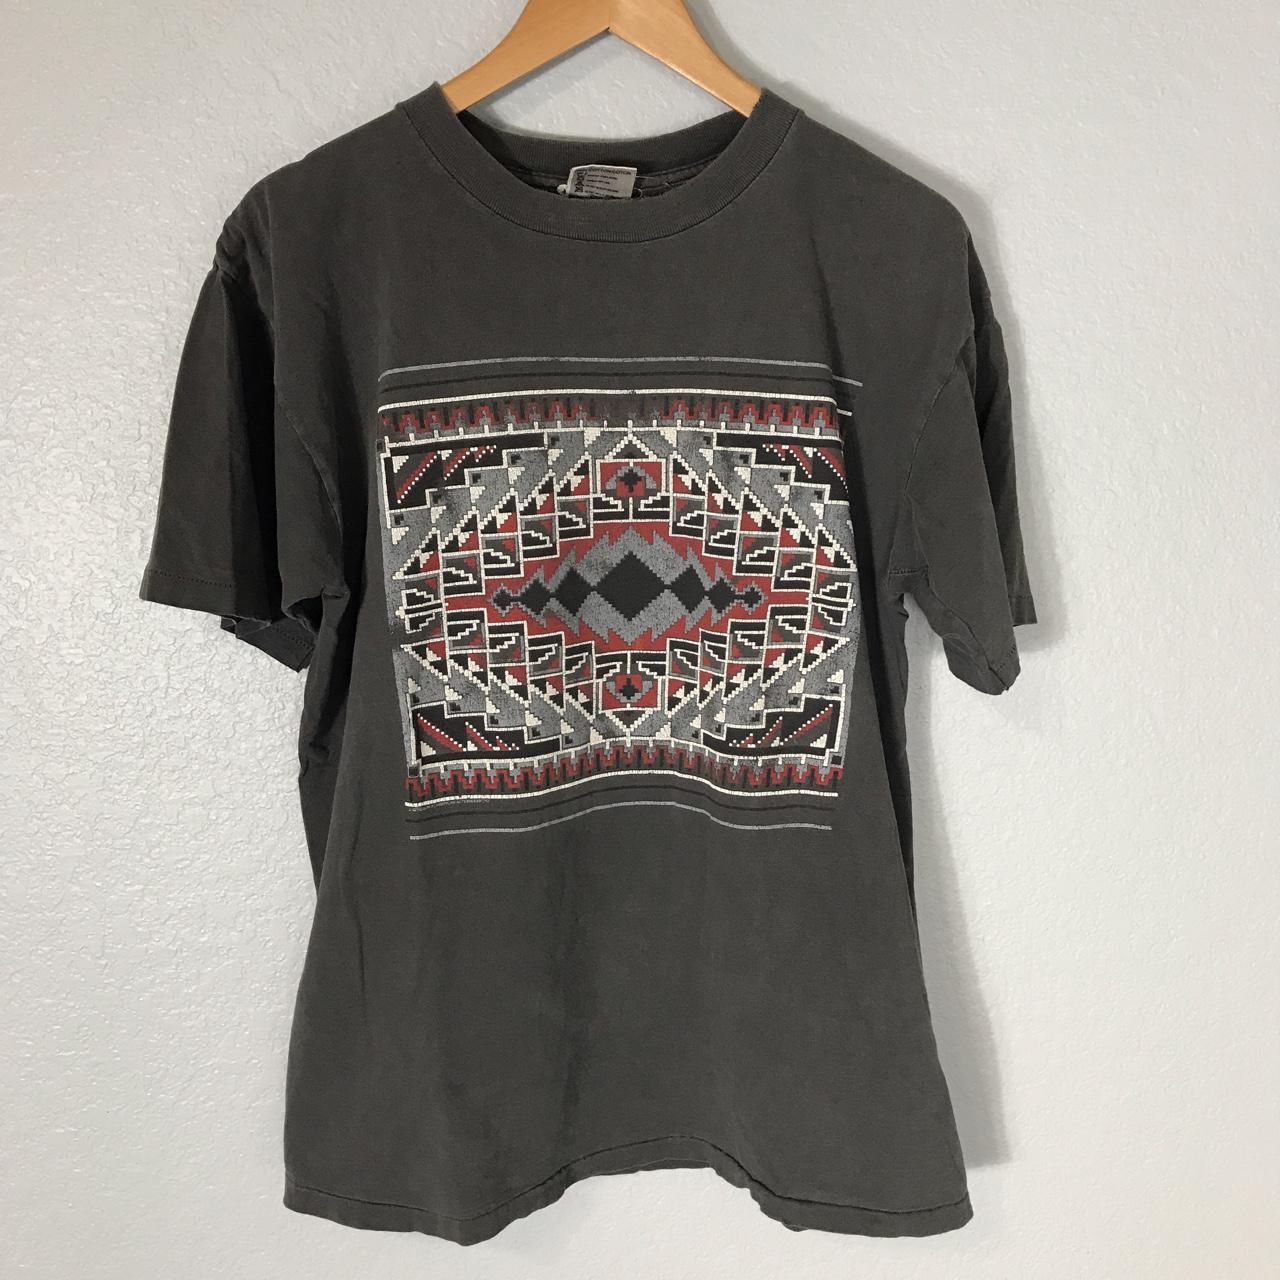 Vintage 1990s Aztec Graphic Faded and Distressed... - Depop